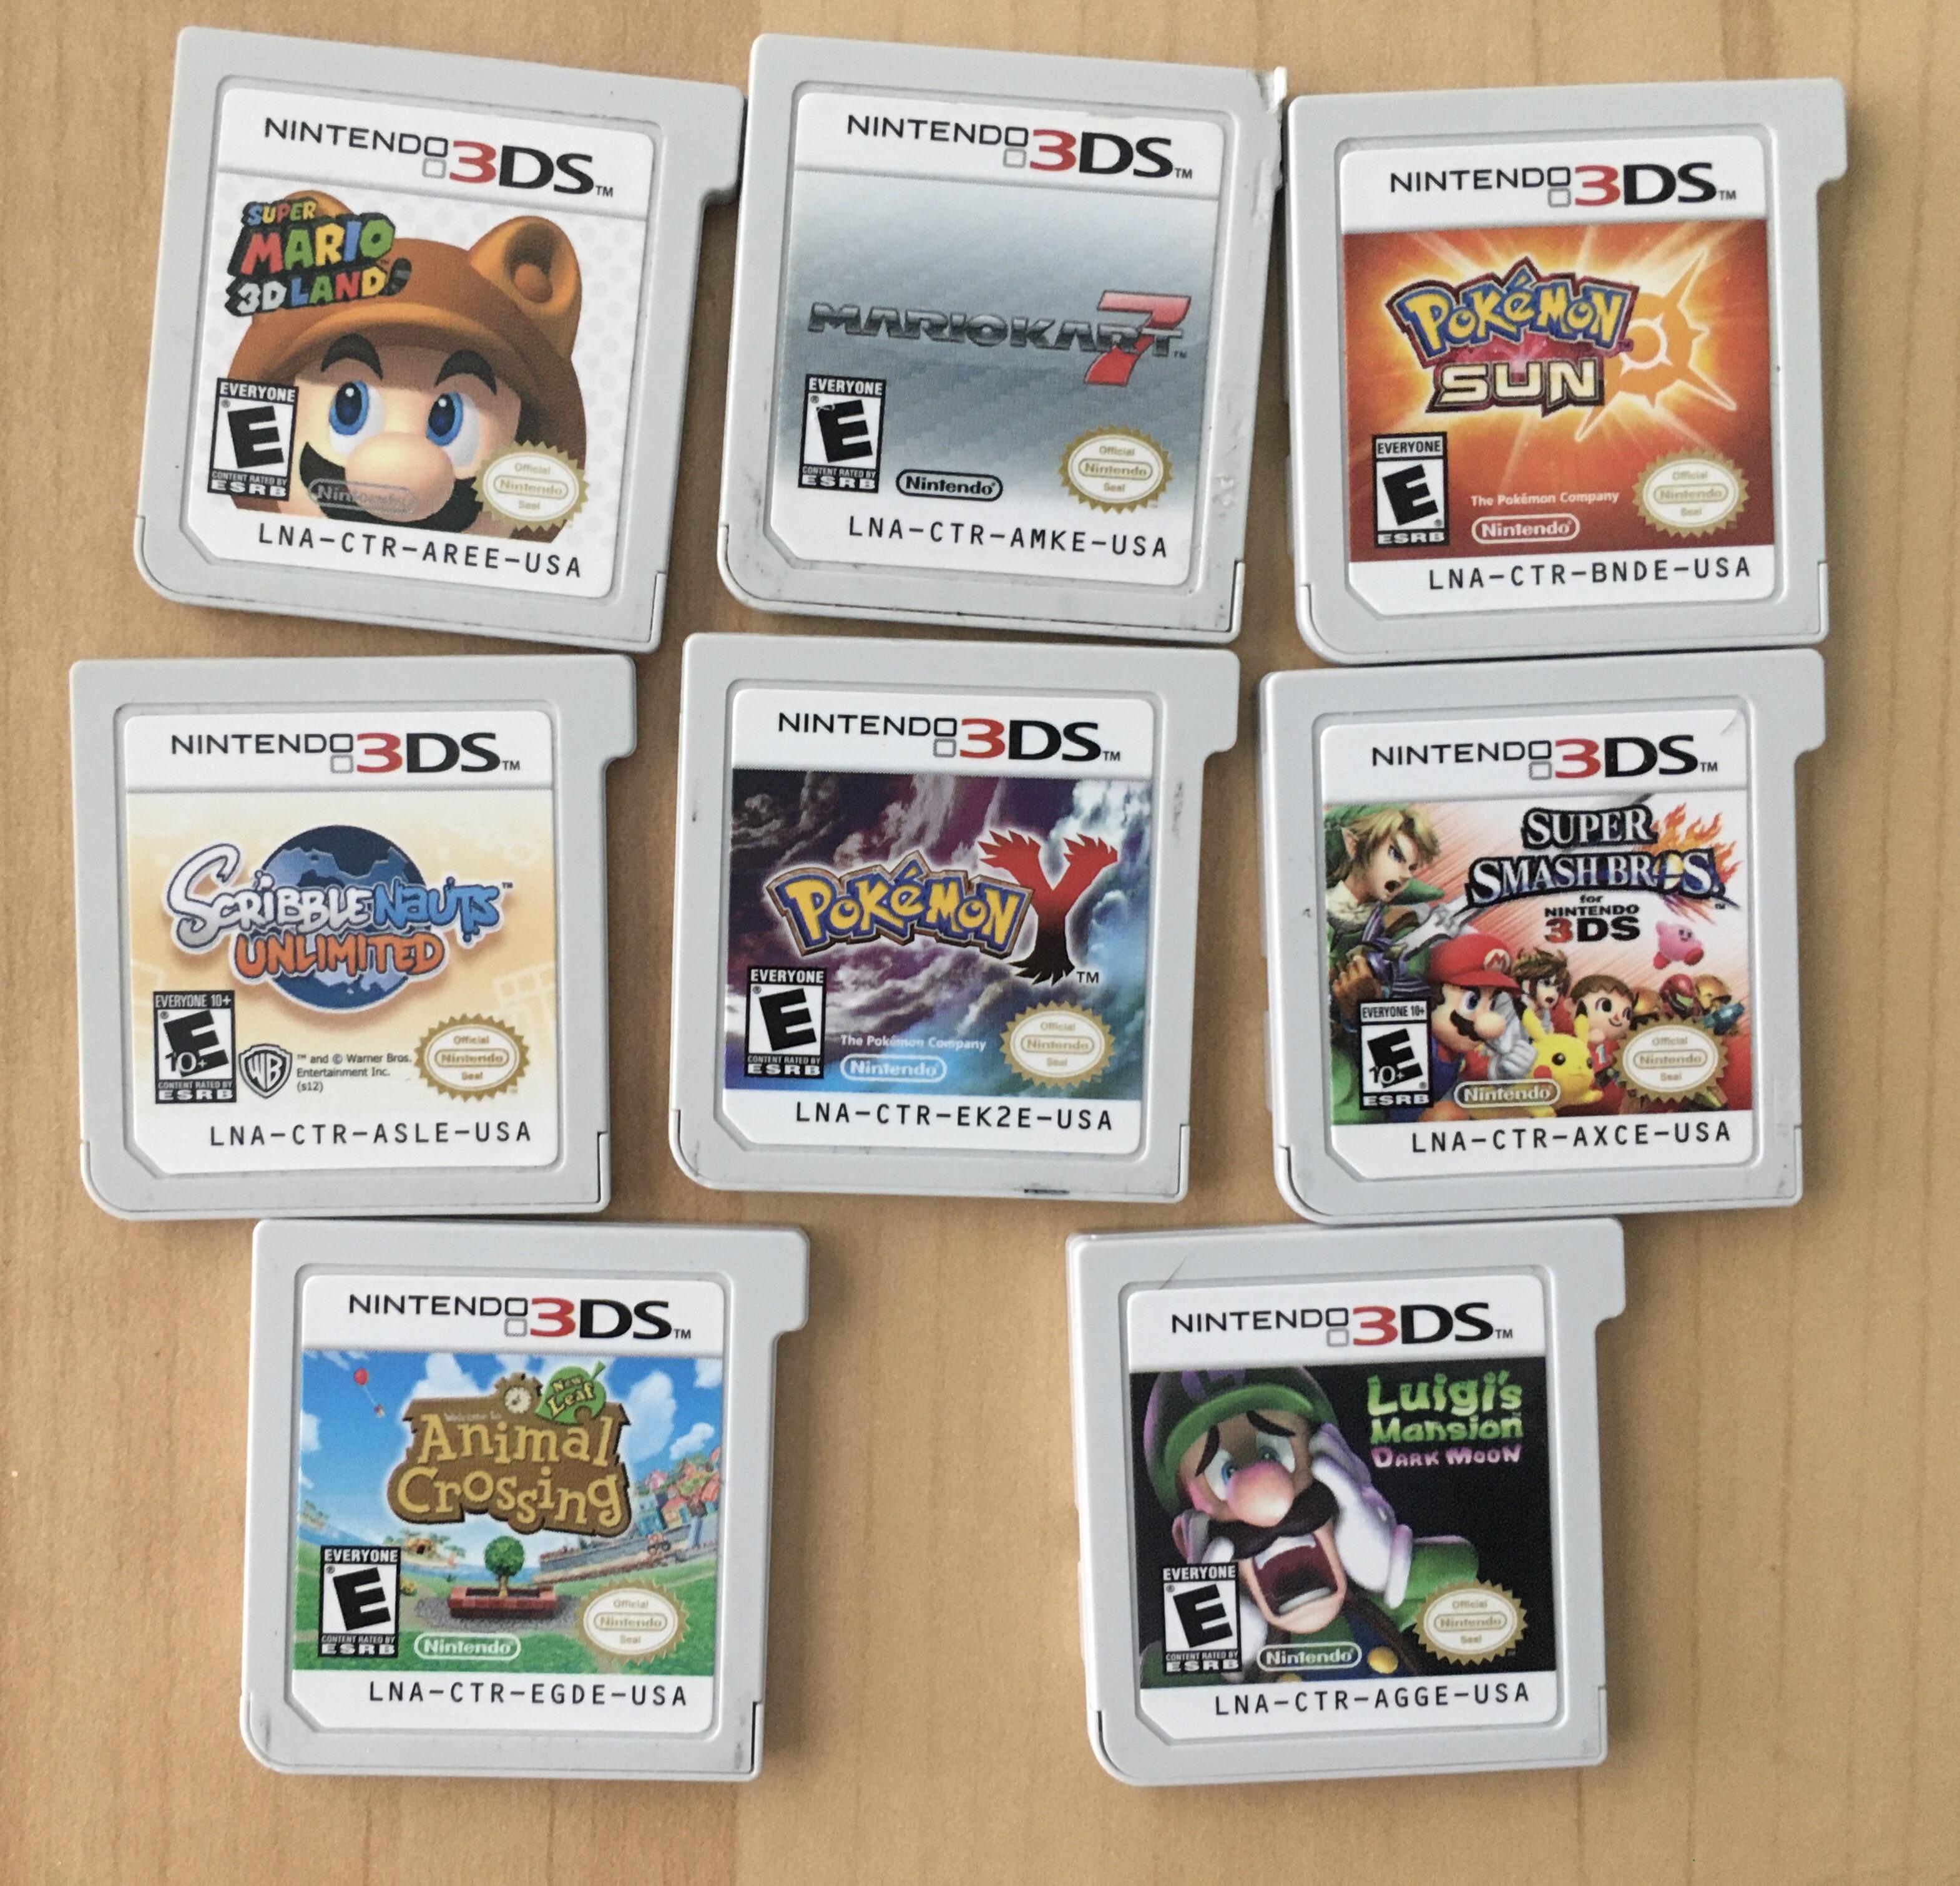 Image I posted to Reddit of my 3DS games.